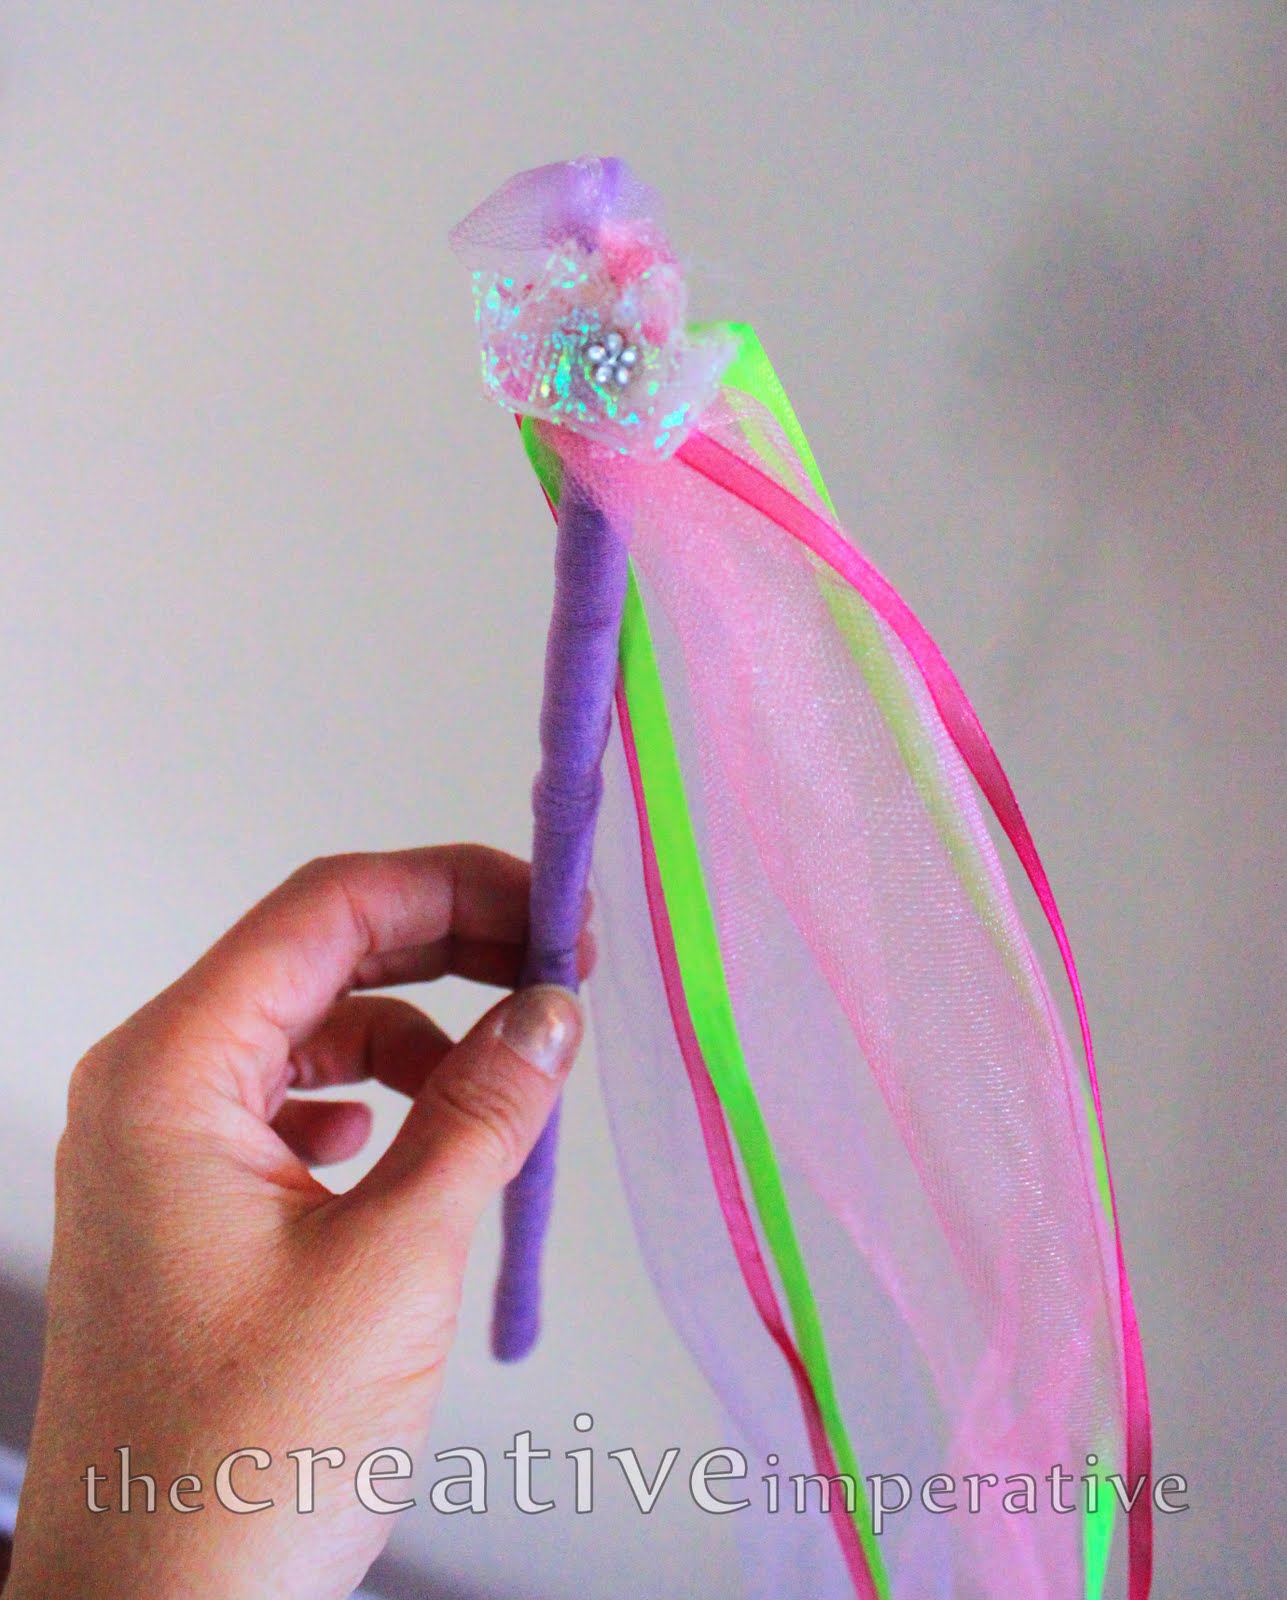 The Creative Imperative: What Goes with a Tutu? A Princess Wand!